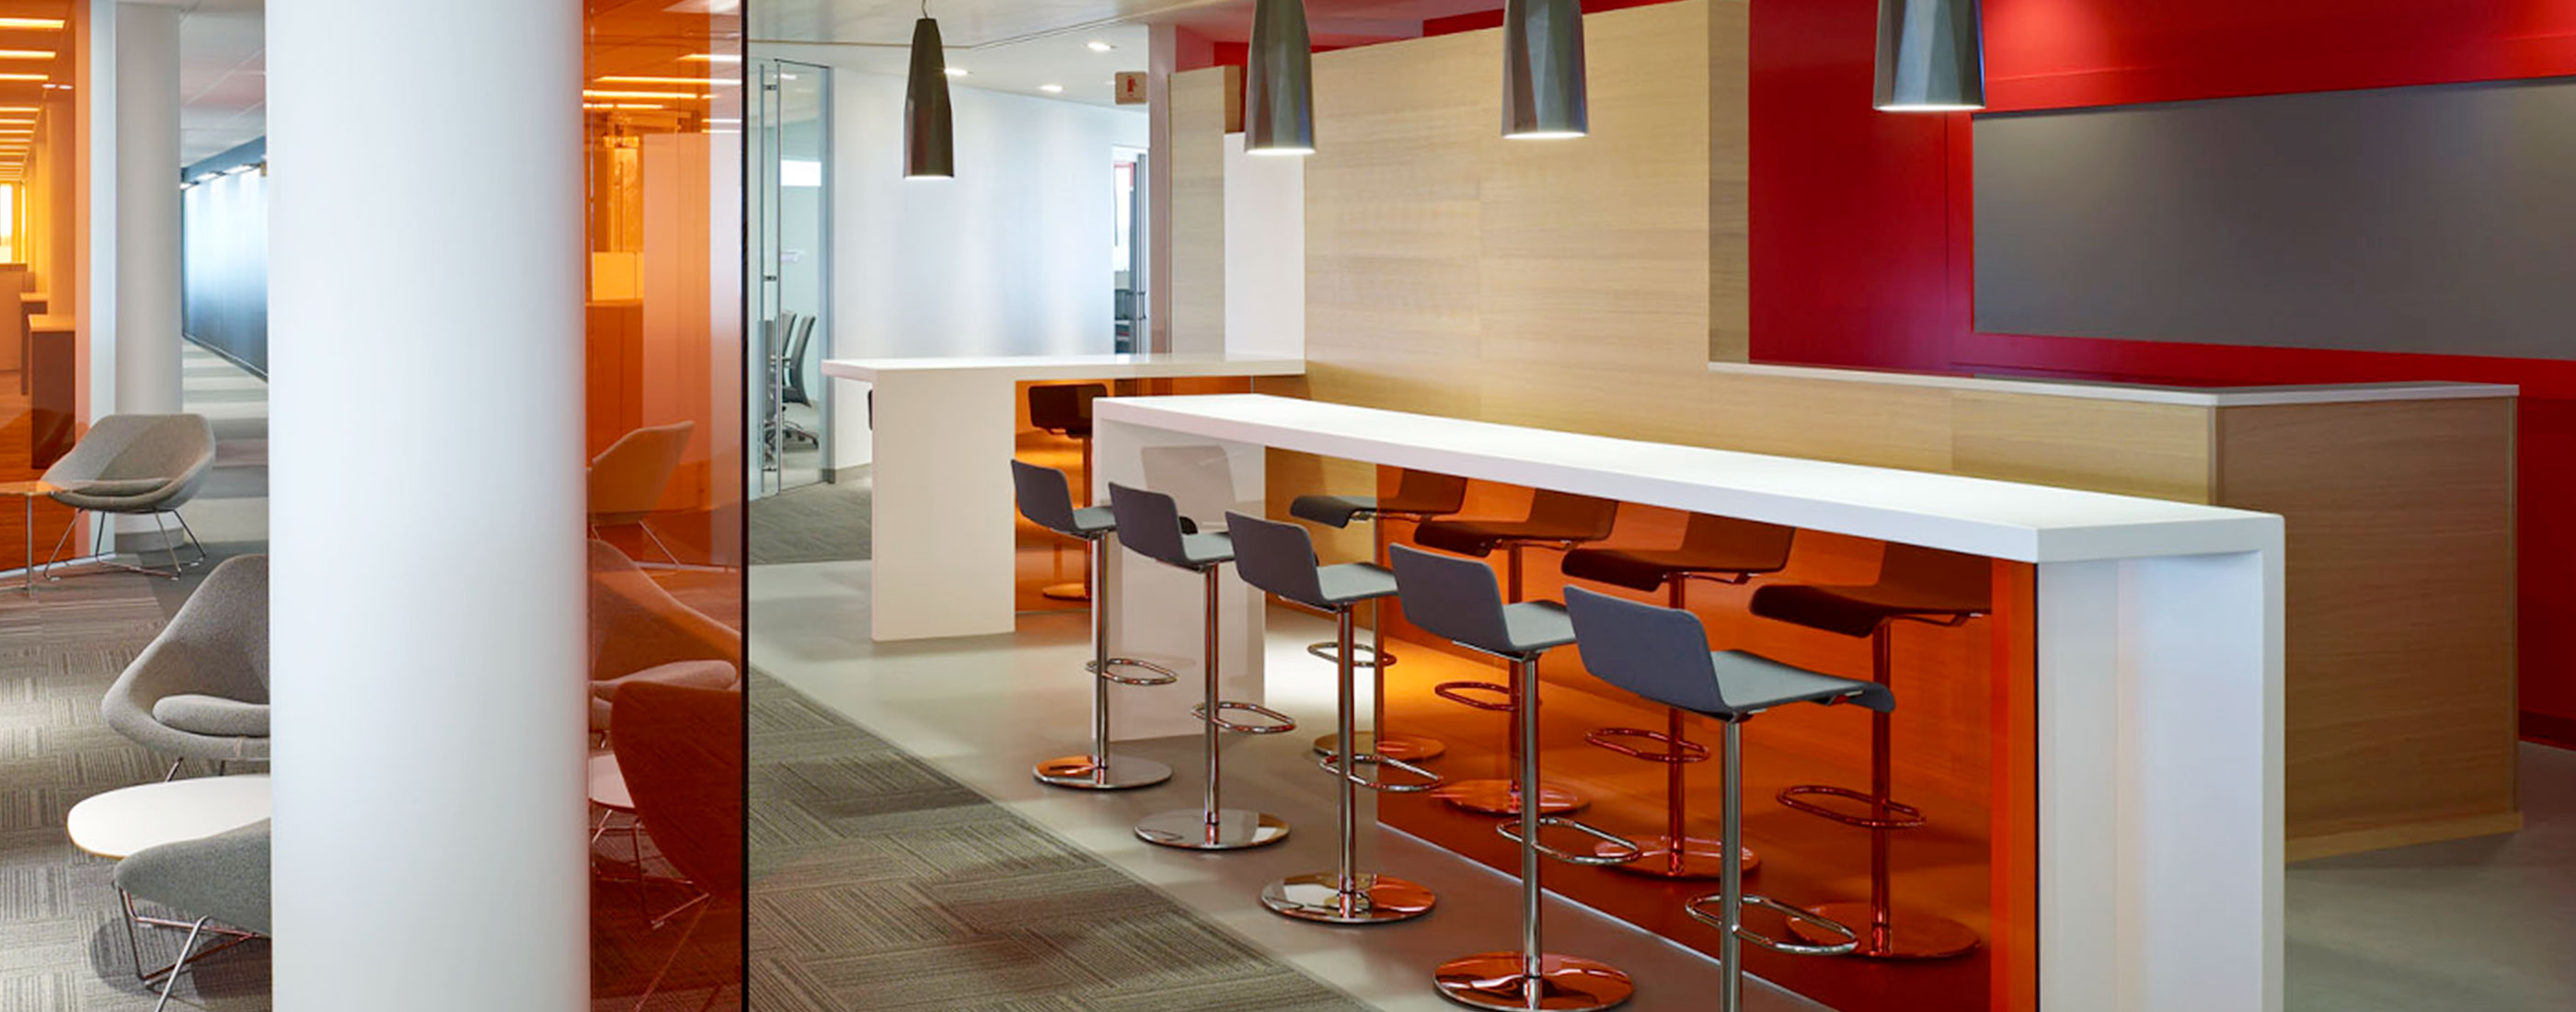 One of many informal meeting areas at the Cardinal Health Corporate Headquarters, designed by OHM Advisors.